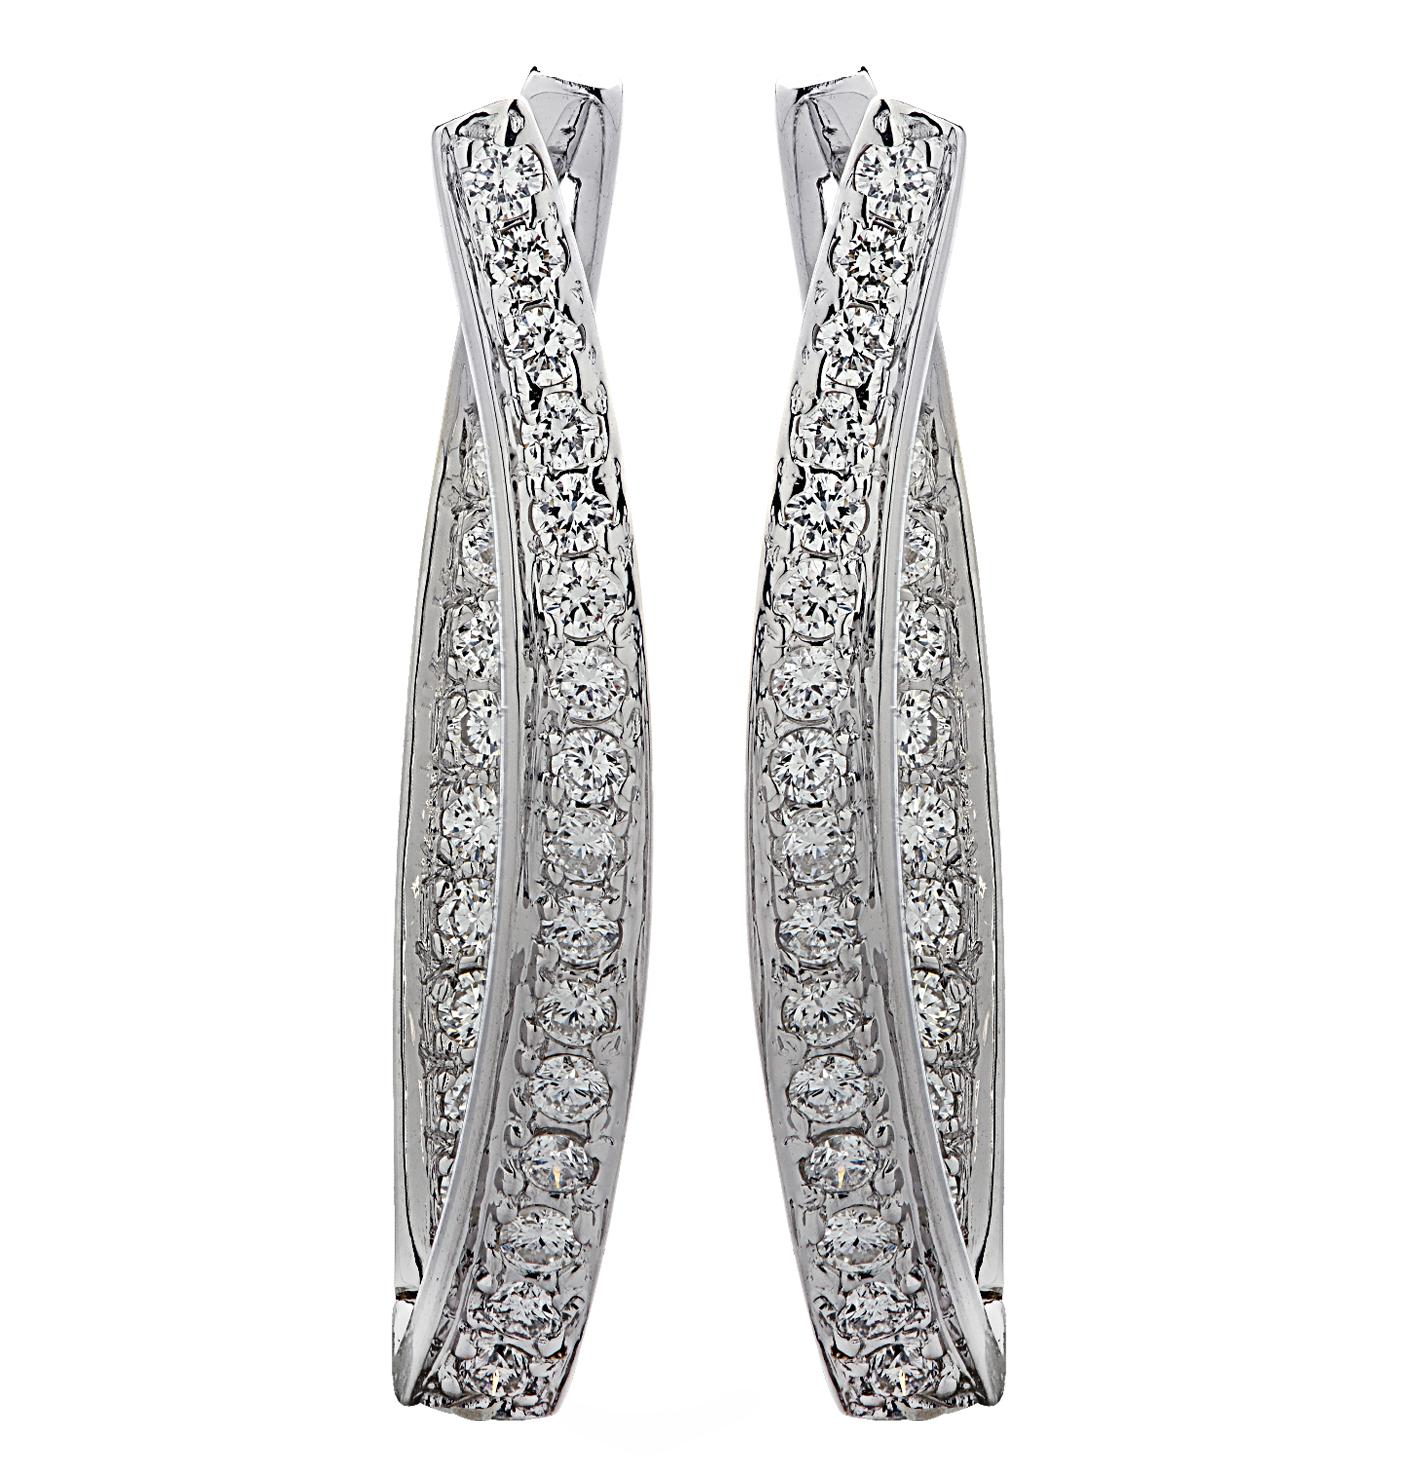 Stunning in and out diamond hoop earrings crafted in white gold, featuring 50 round brilliant cut diamonds weighing approximately 1 carat total G color, VS-SI clarity. Each diamond is carefully selected, perfectly matched and set on the inside and